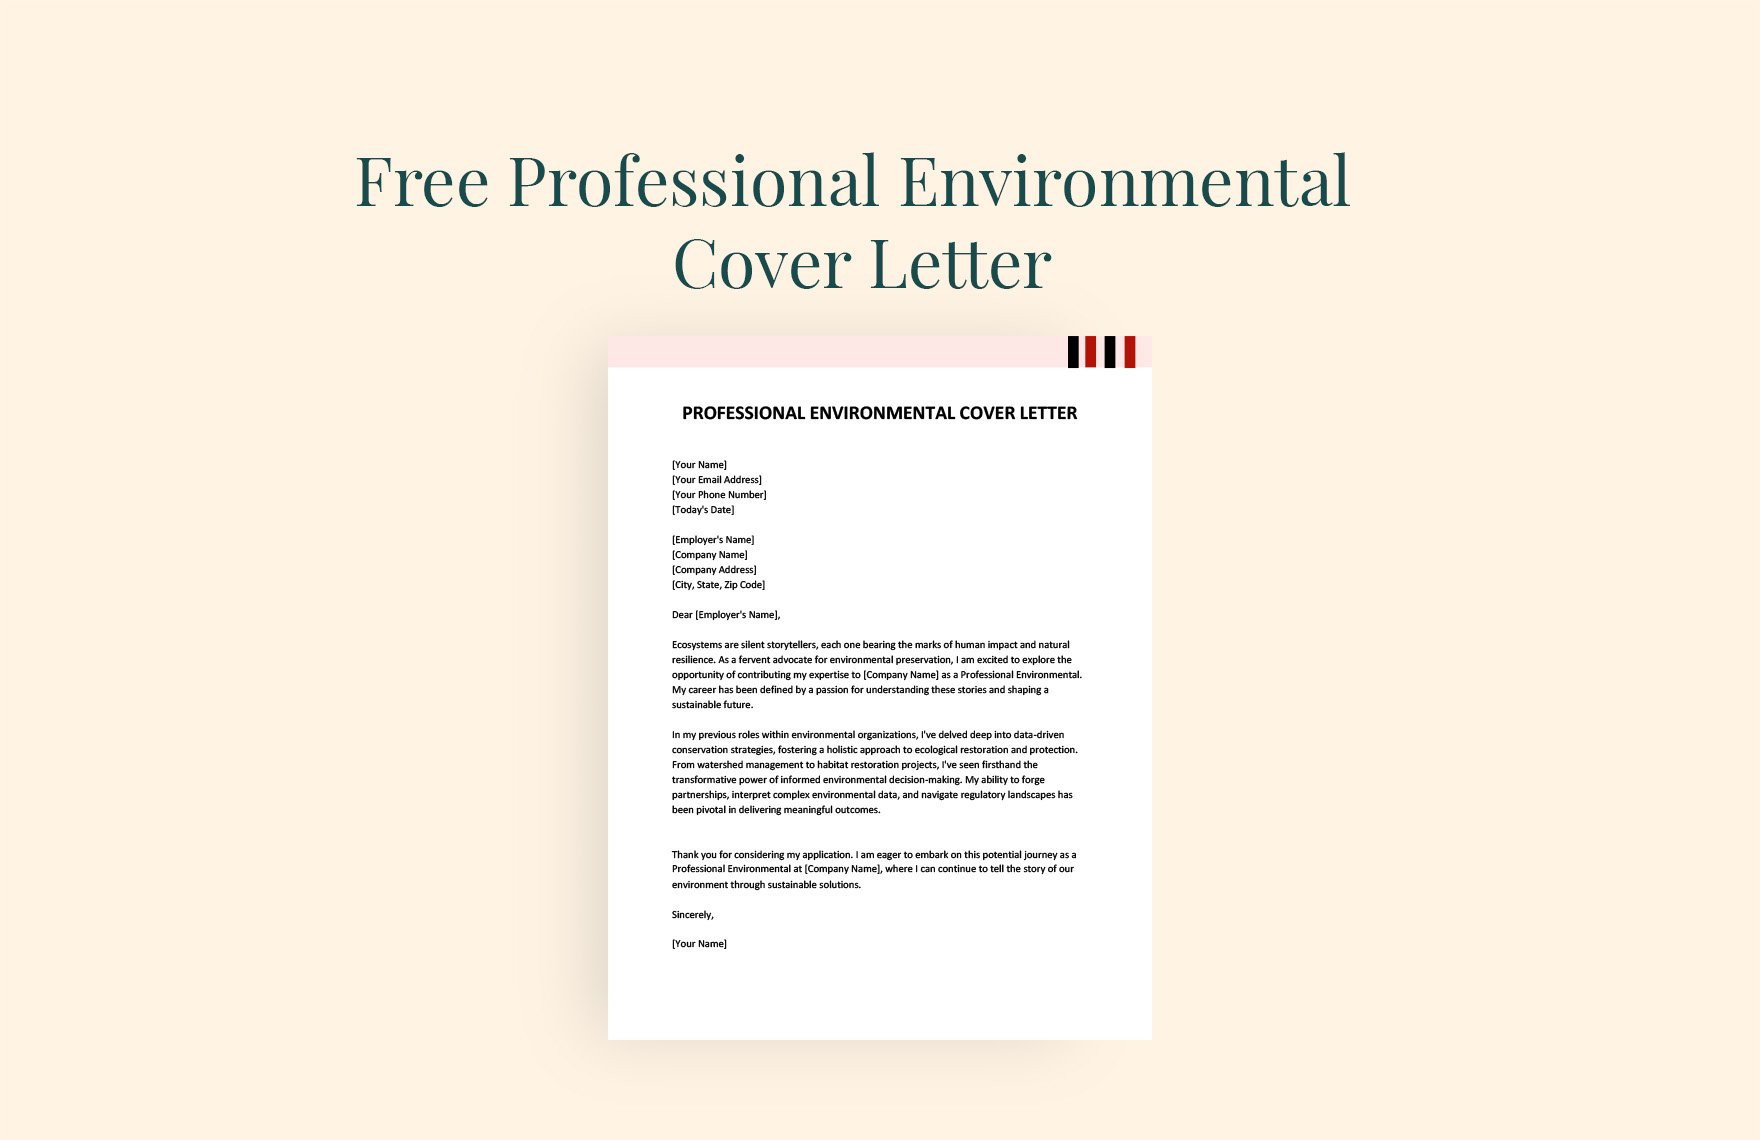 Professional Environmental Cover Letter in Word, Google Docs